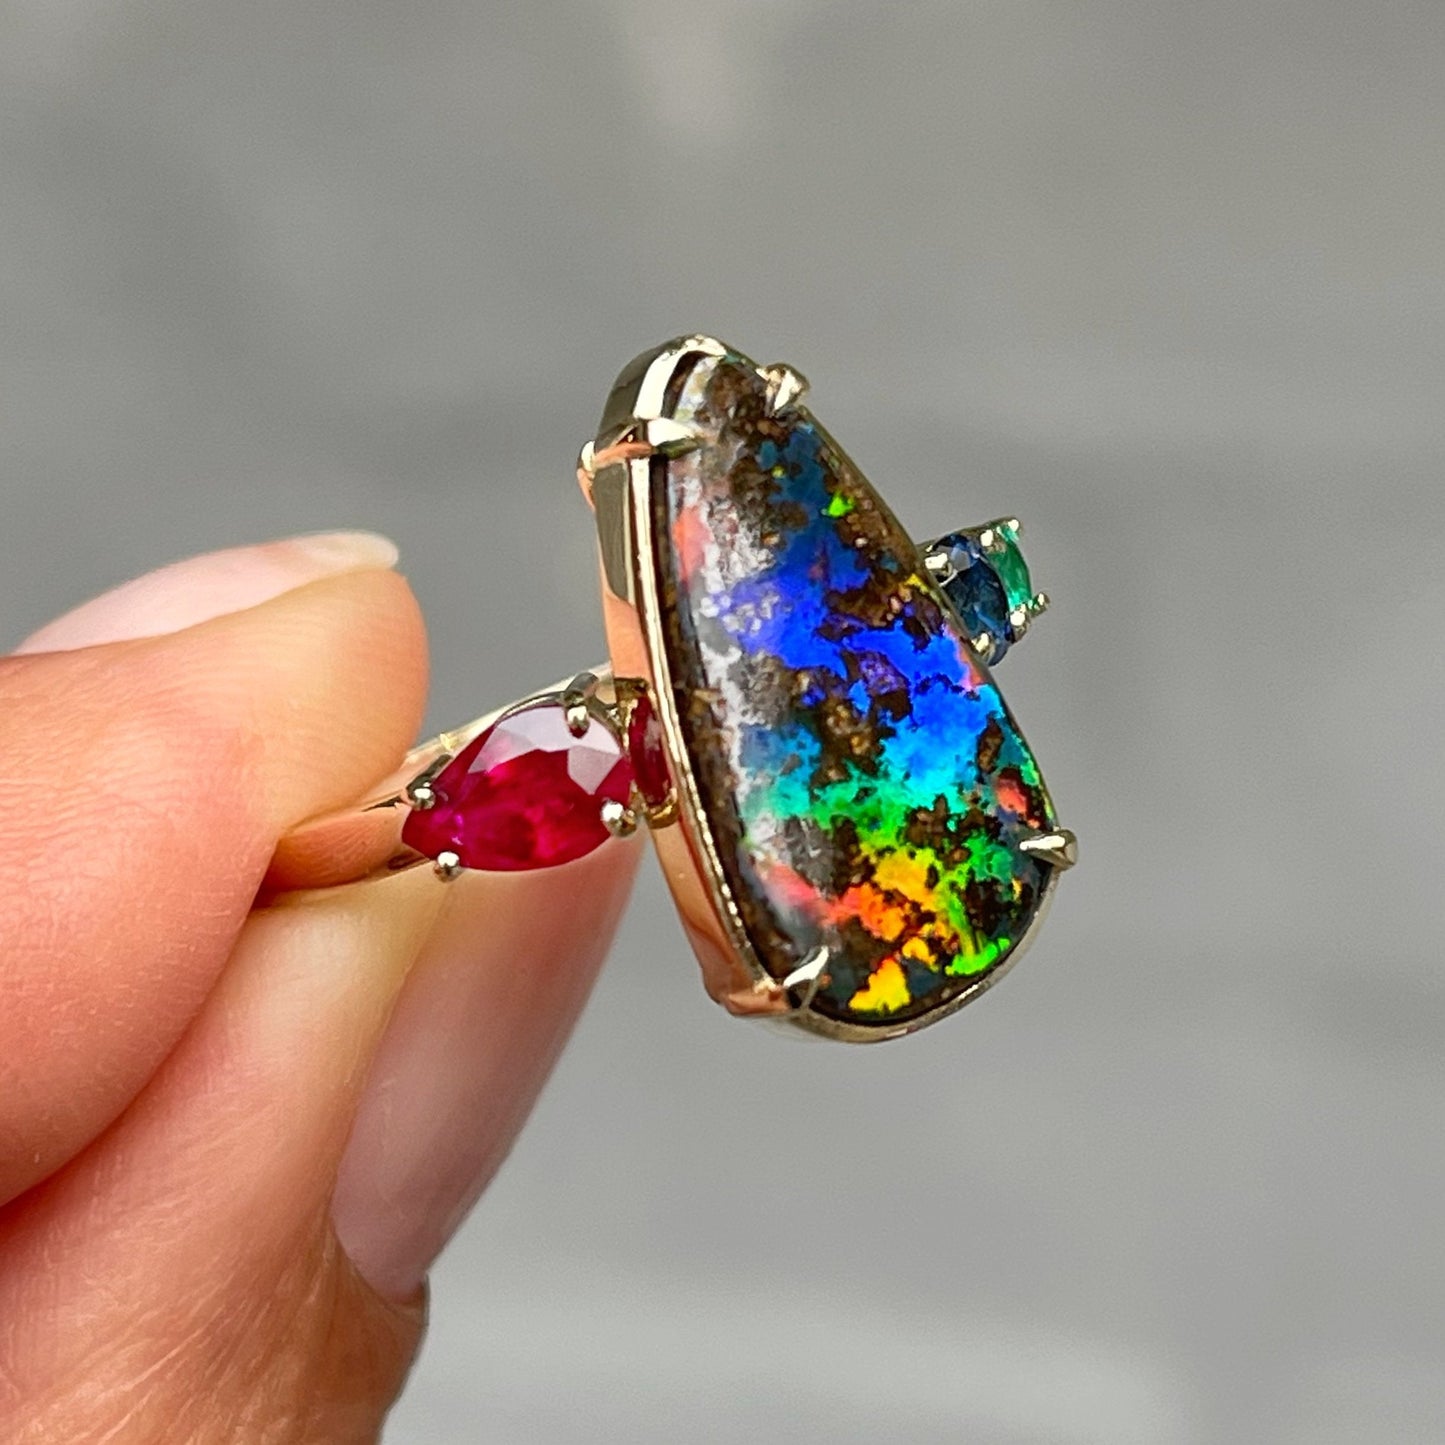 Boulder opal ring with rainbow opal by NIXIN Jewelry